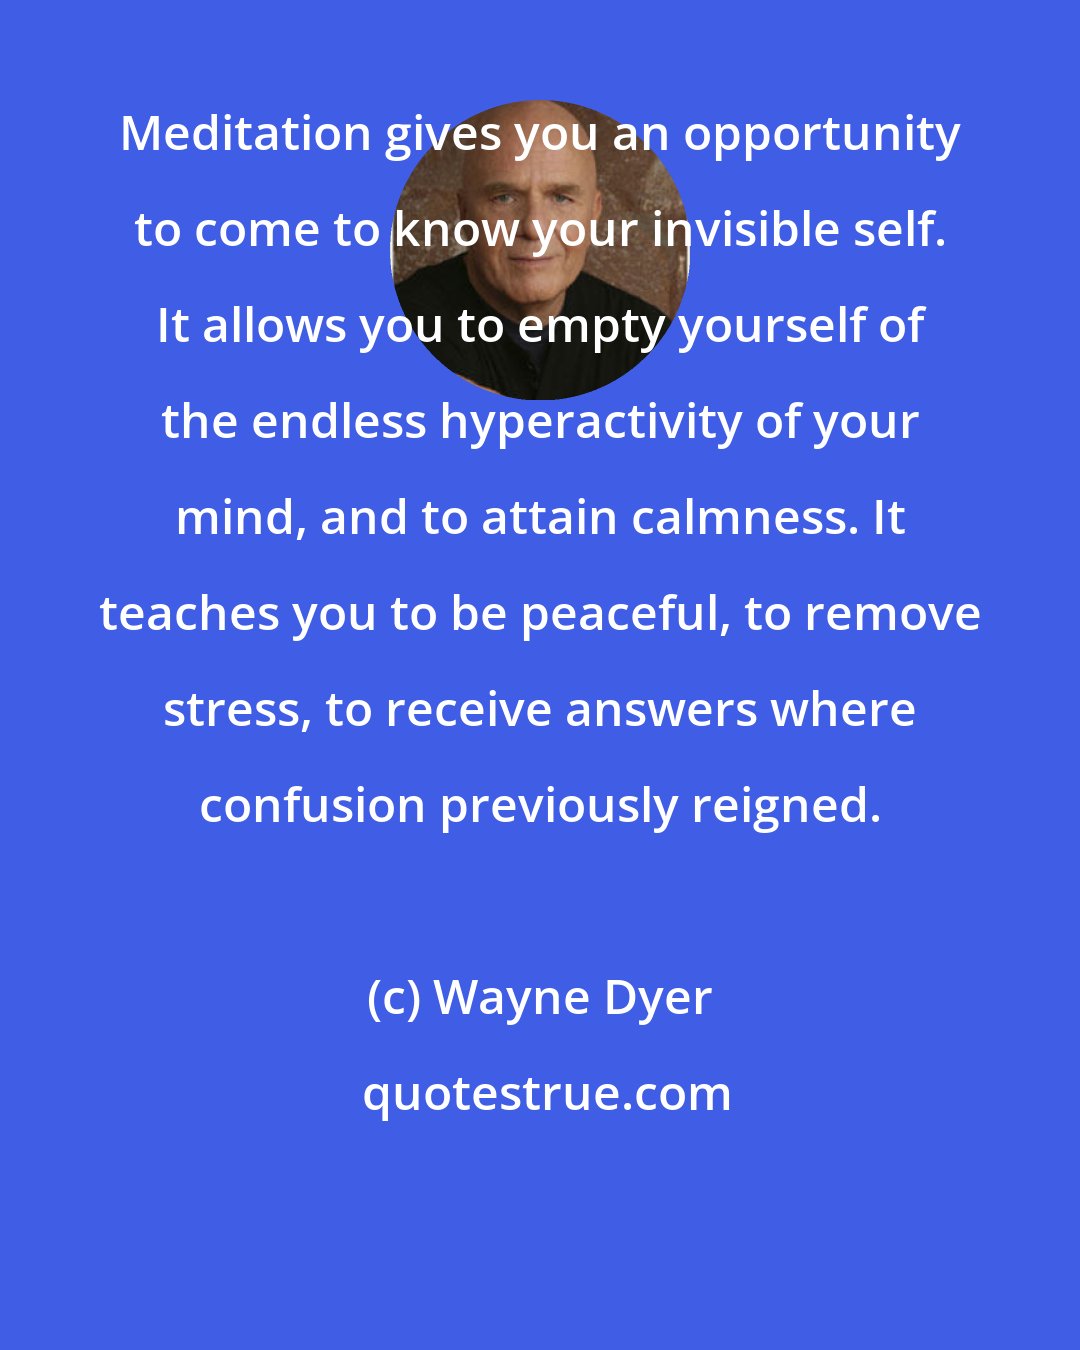 Wayne Dyer: Meditation gives you an opportunity to come to know your invisible self. It allows you to empty yourself of the endless hyperactivity of your mind, and to attain calmness. It teaches you to be peaceful, to remove stress, to receive answers where confusion previously reigned.